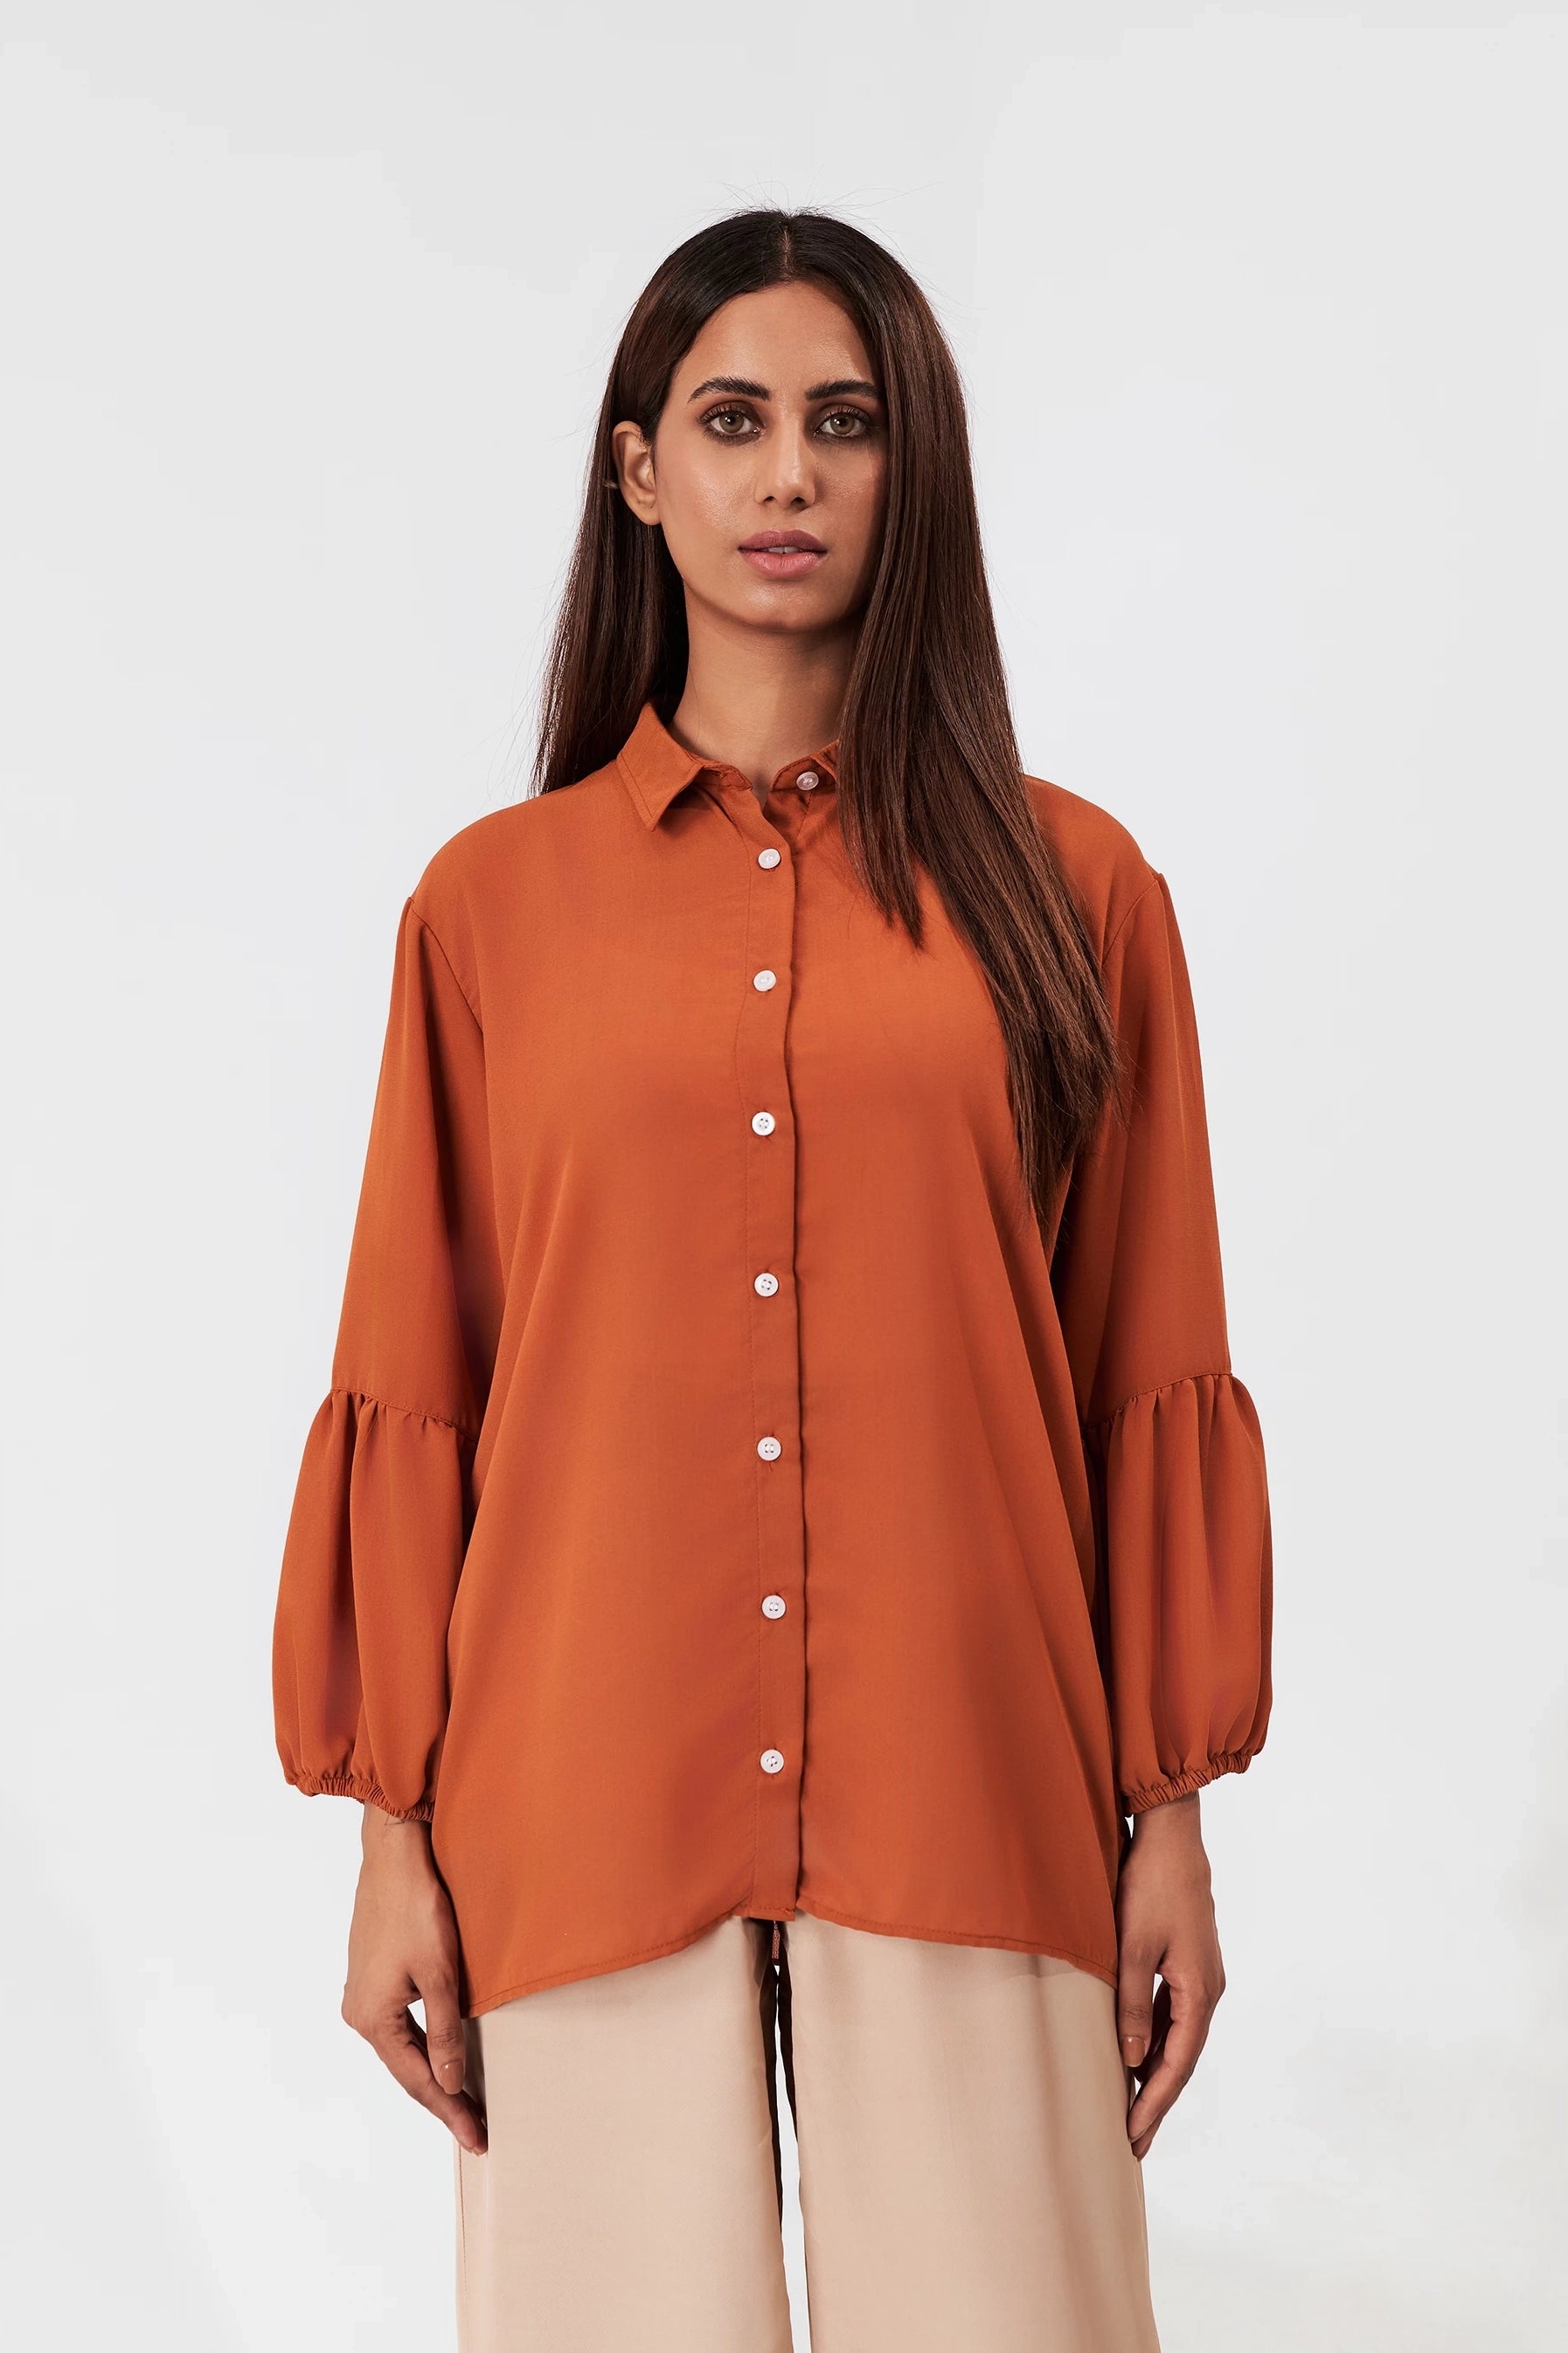 Women's Gathered Sleeves Blouse